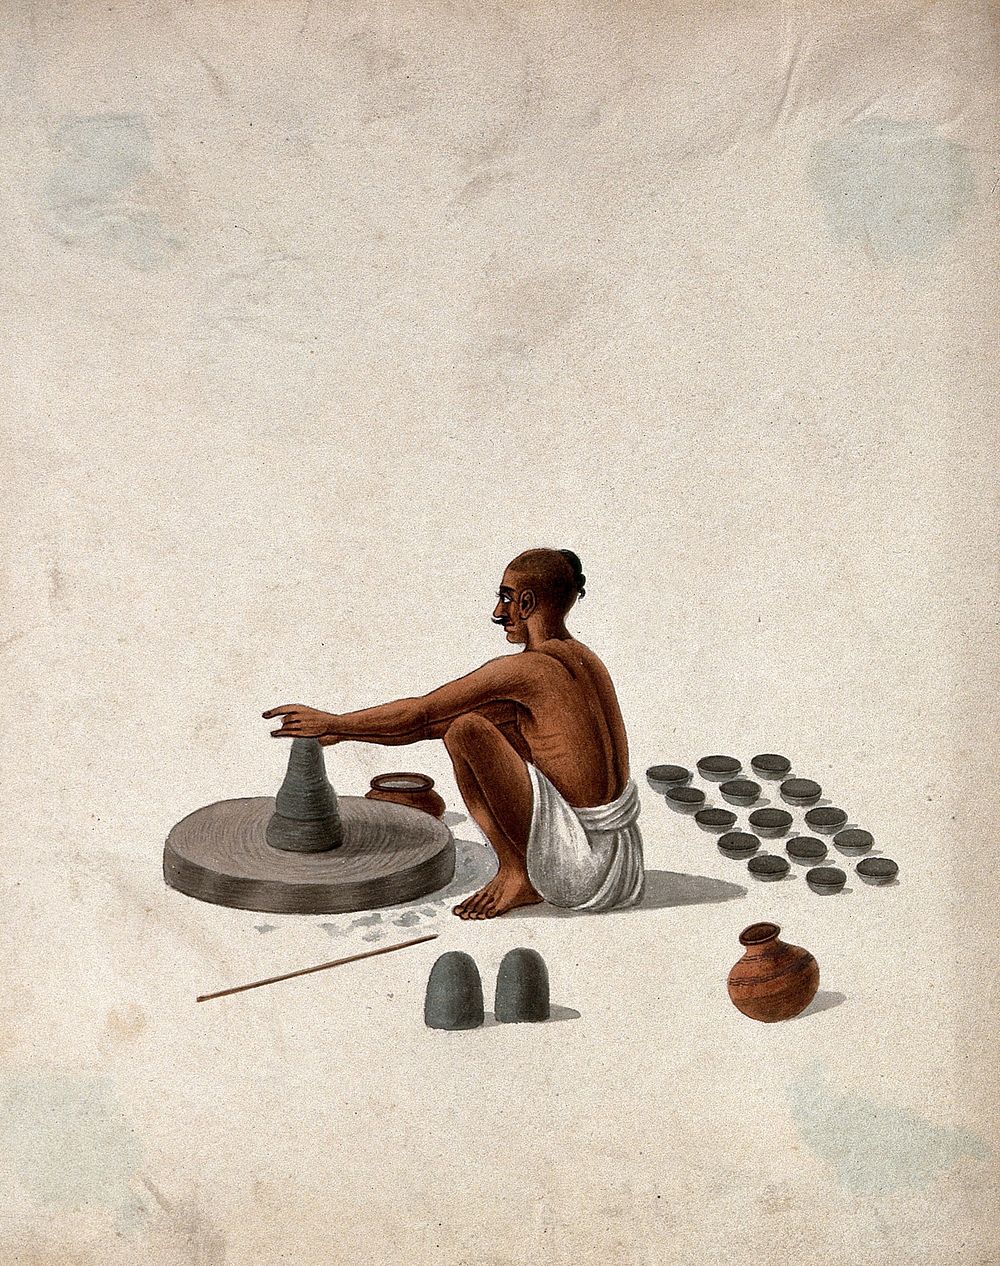 A potter working on the wheel. Gouache painting by an Indian artist.